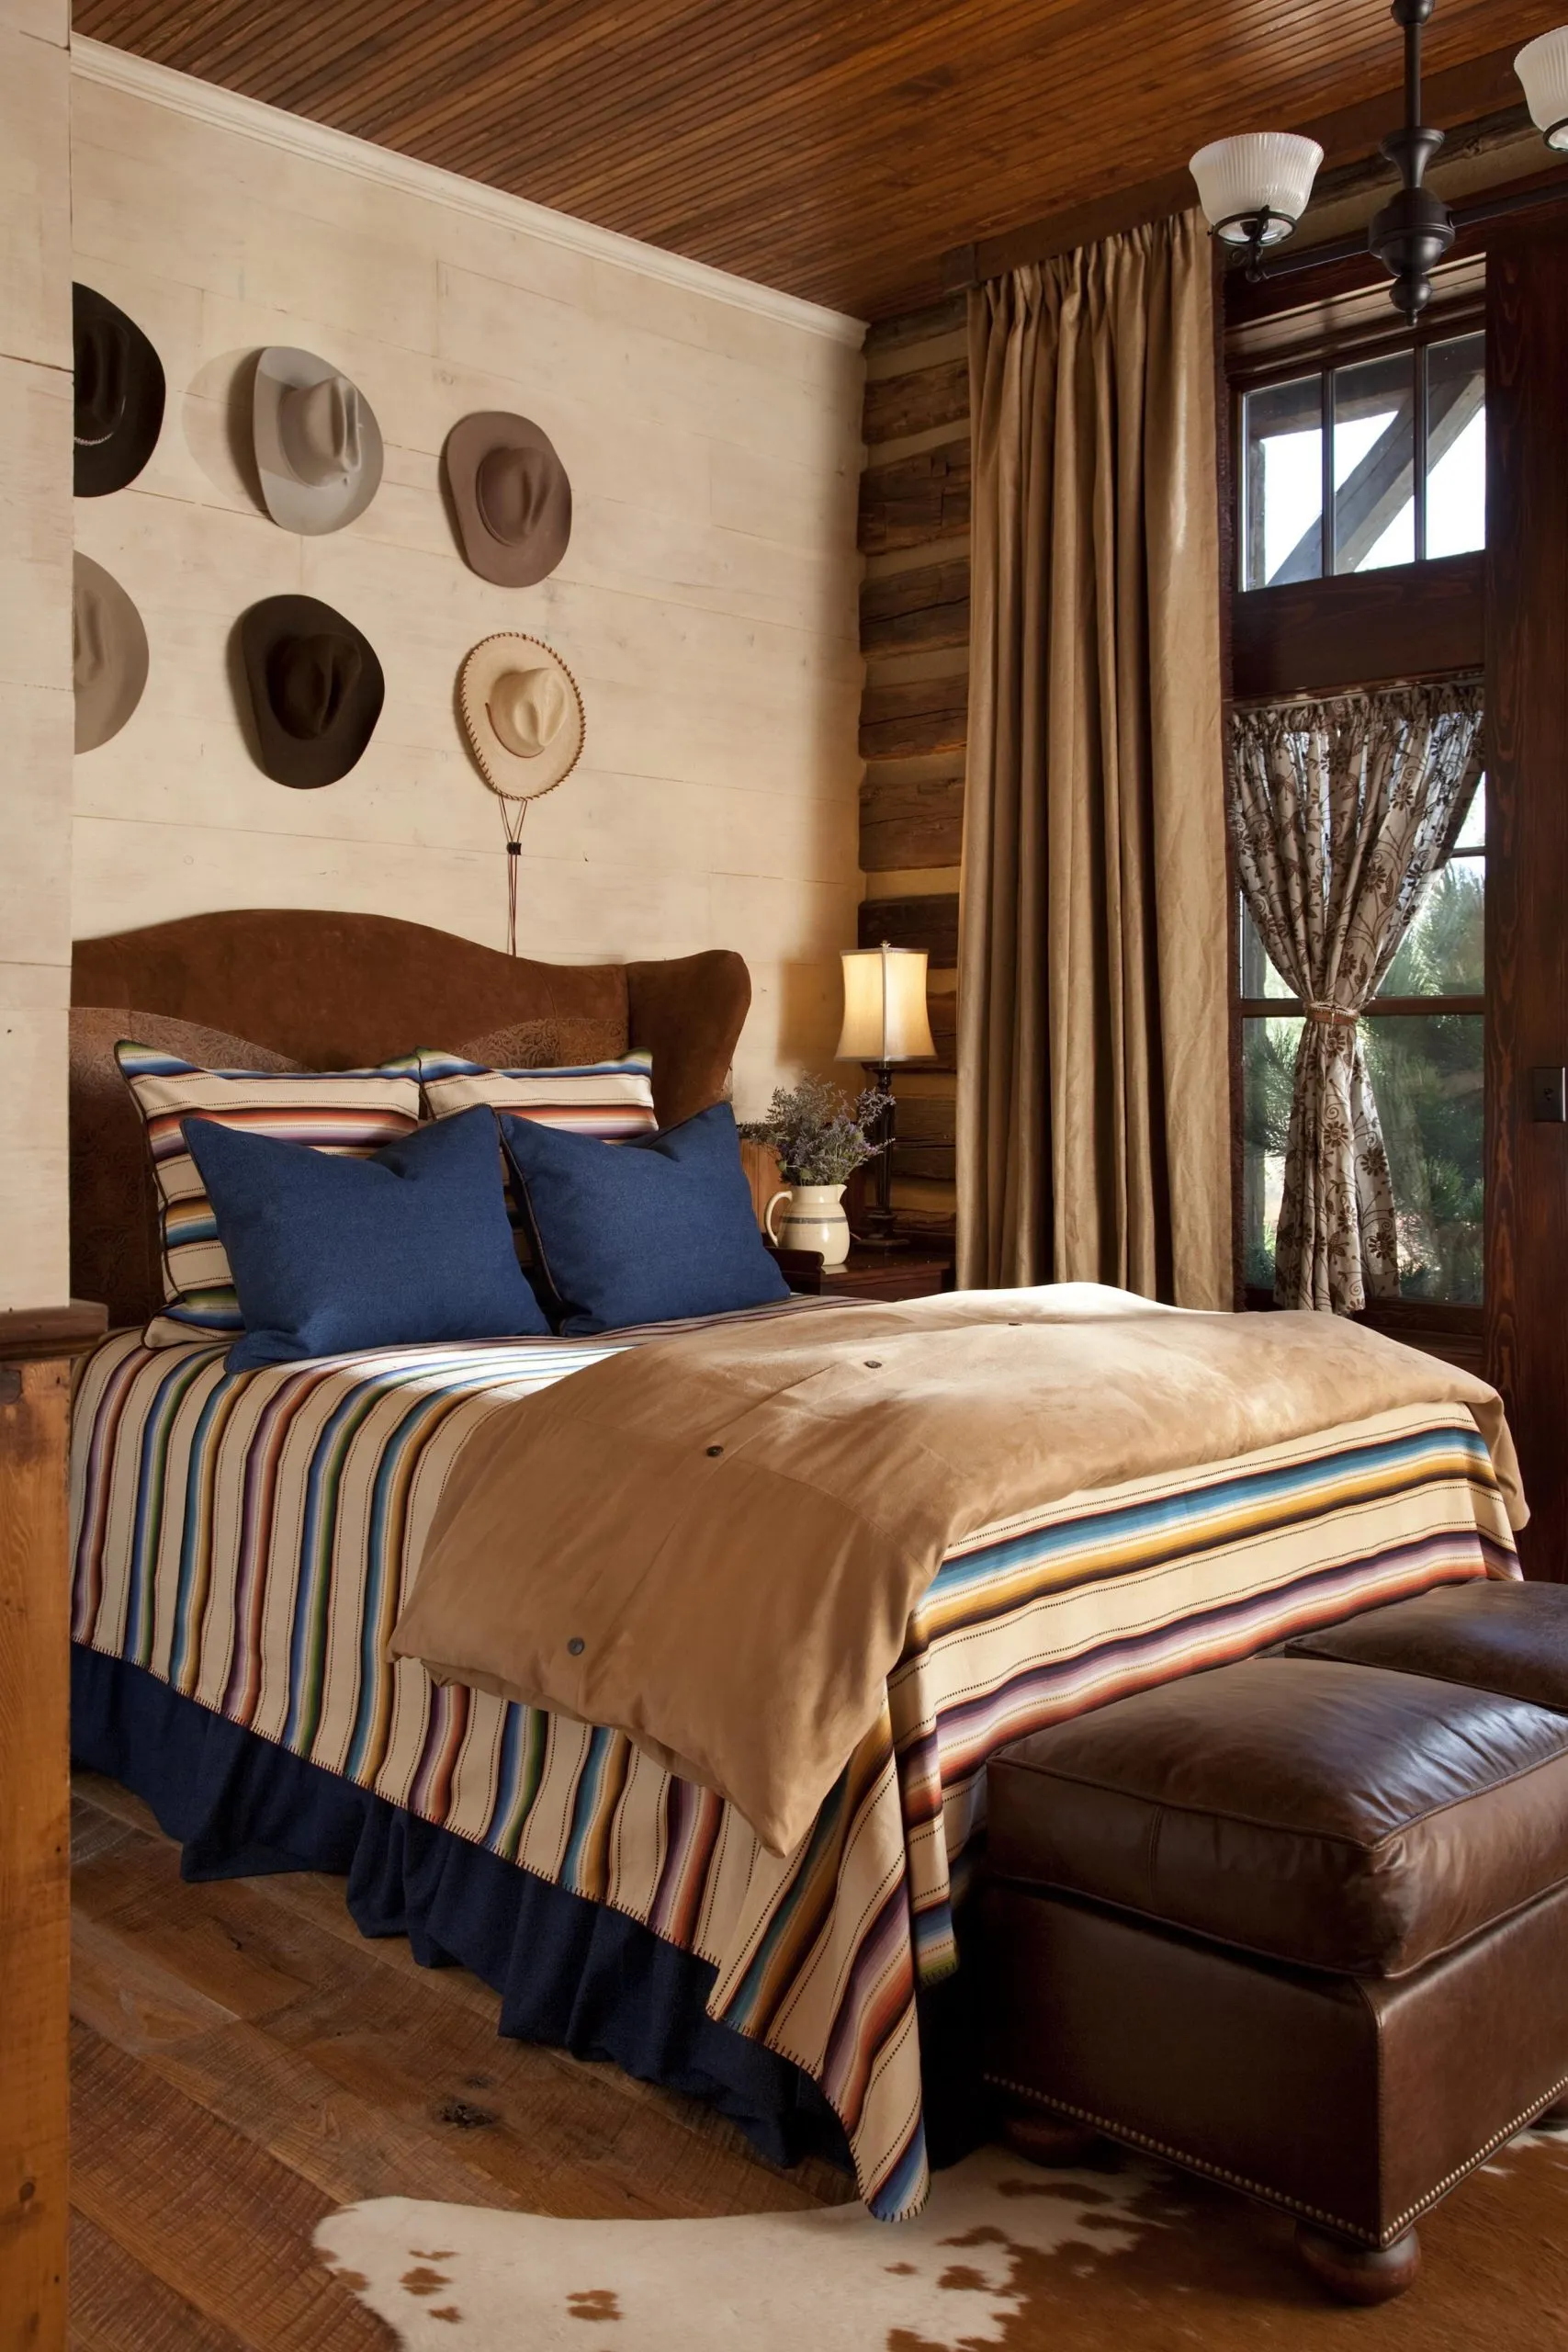 Bed with striped duvet and pillows with six cowboy hats mounted on the wall above the headboard